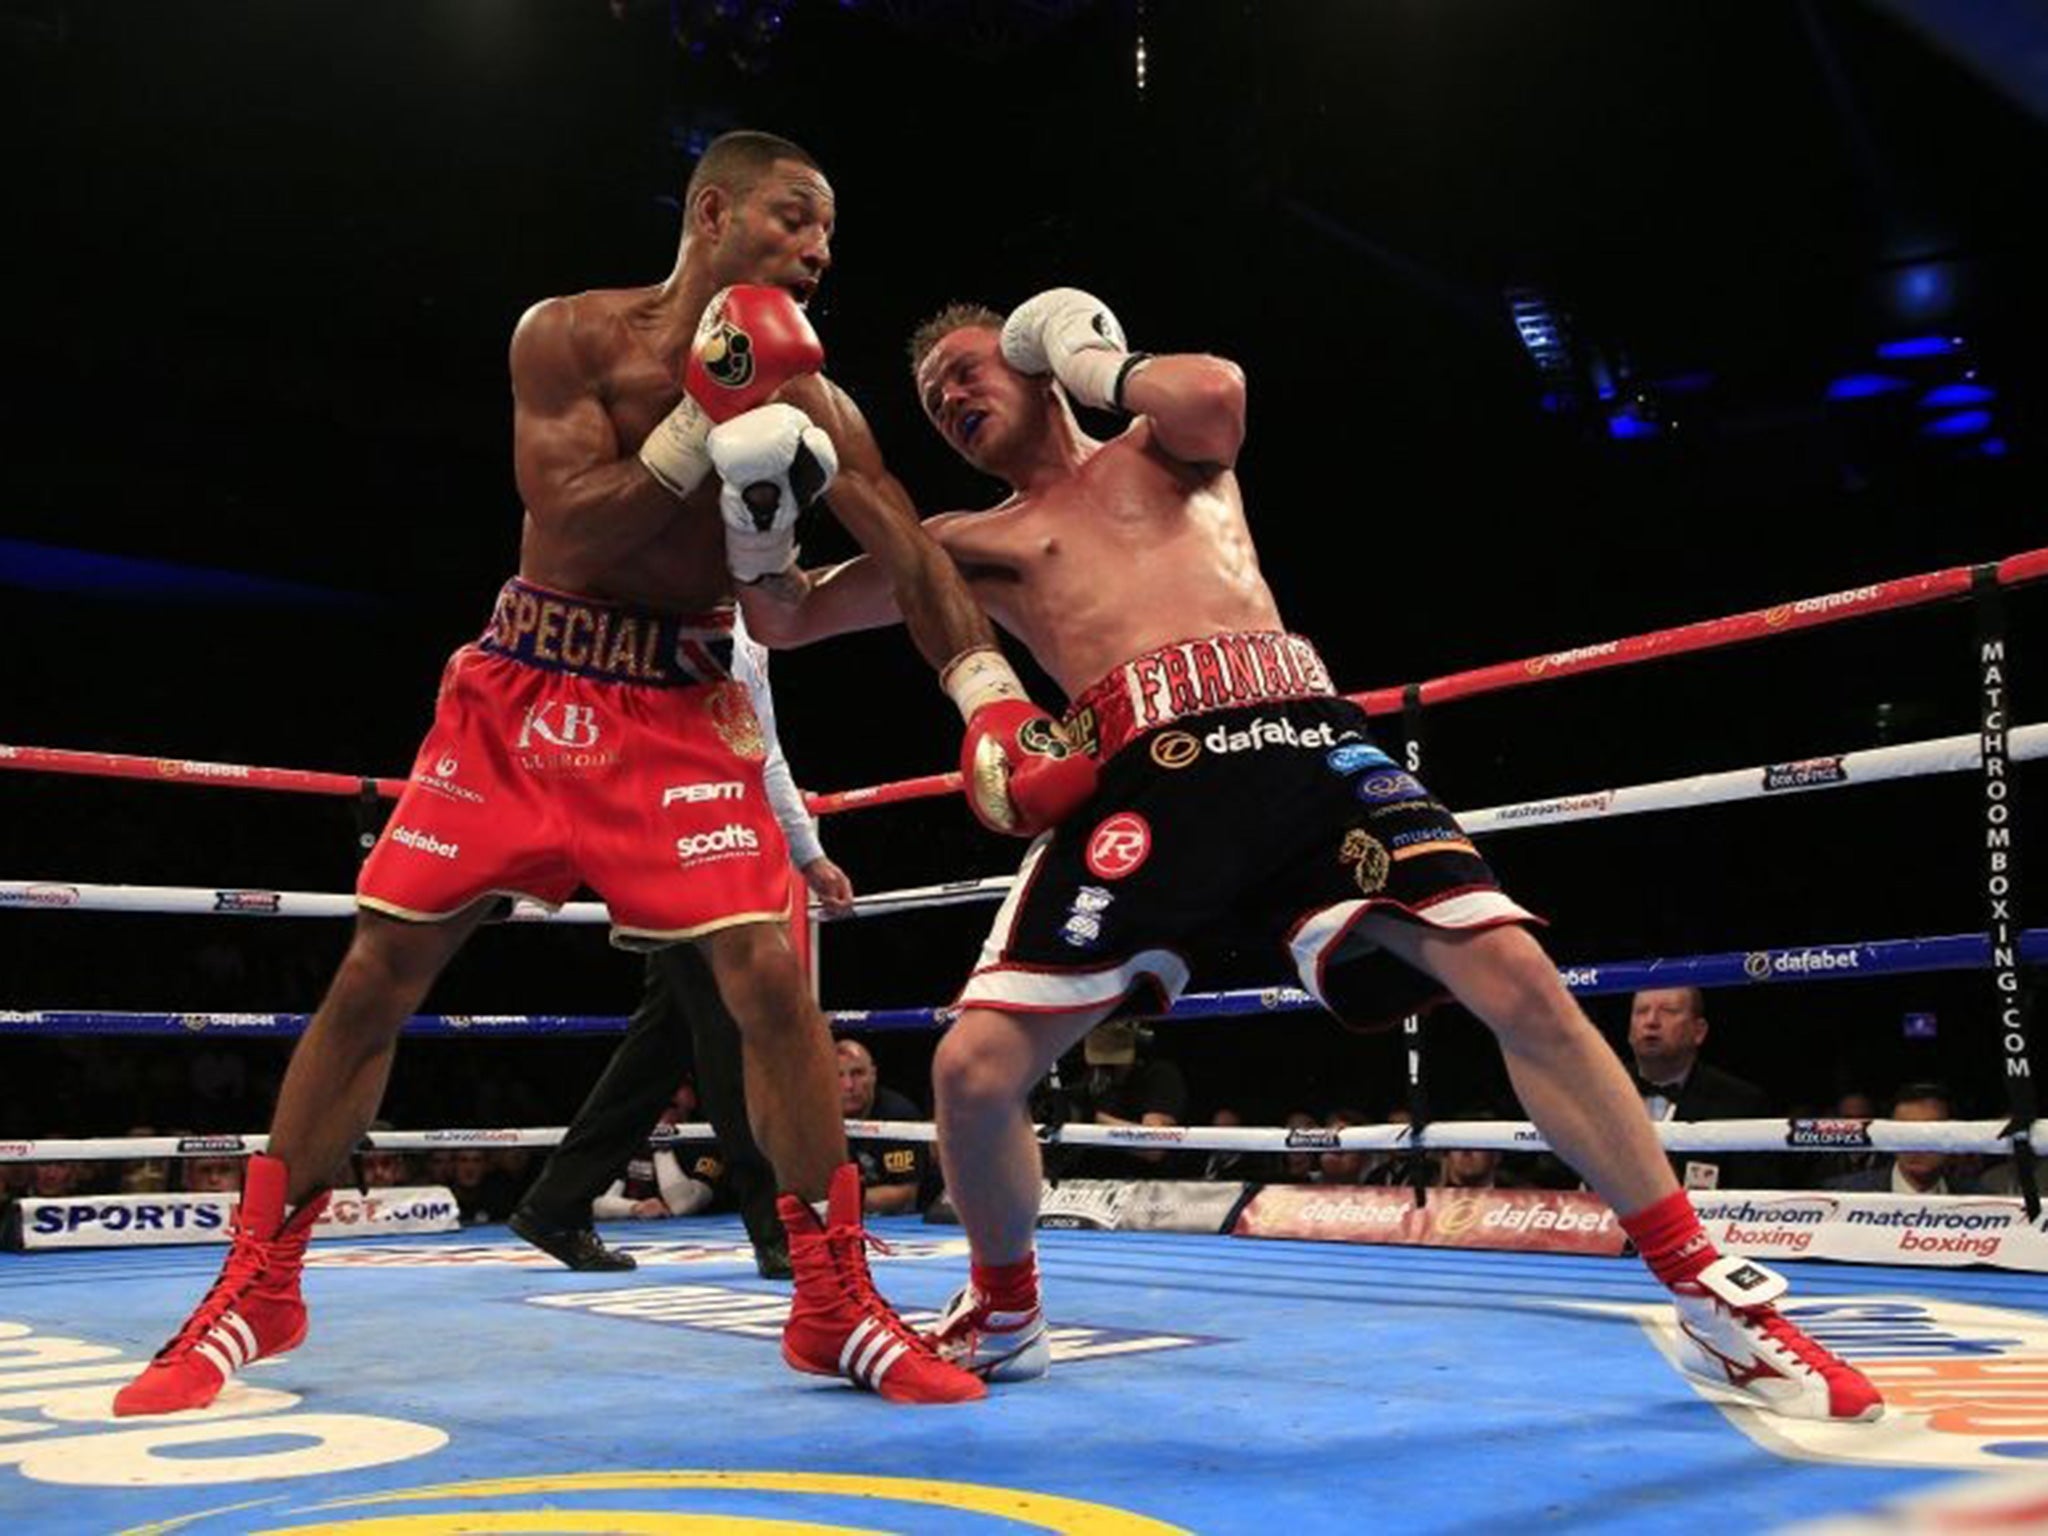 Kell Brook (left) and Frankie Gavin in their IBF World welterweight title fight at the O2 Arena.